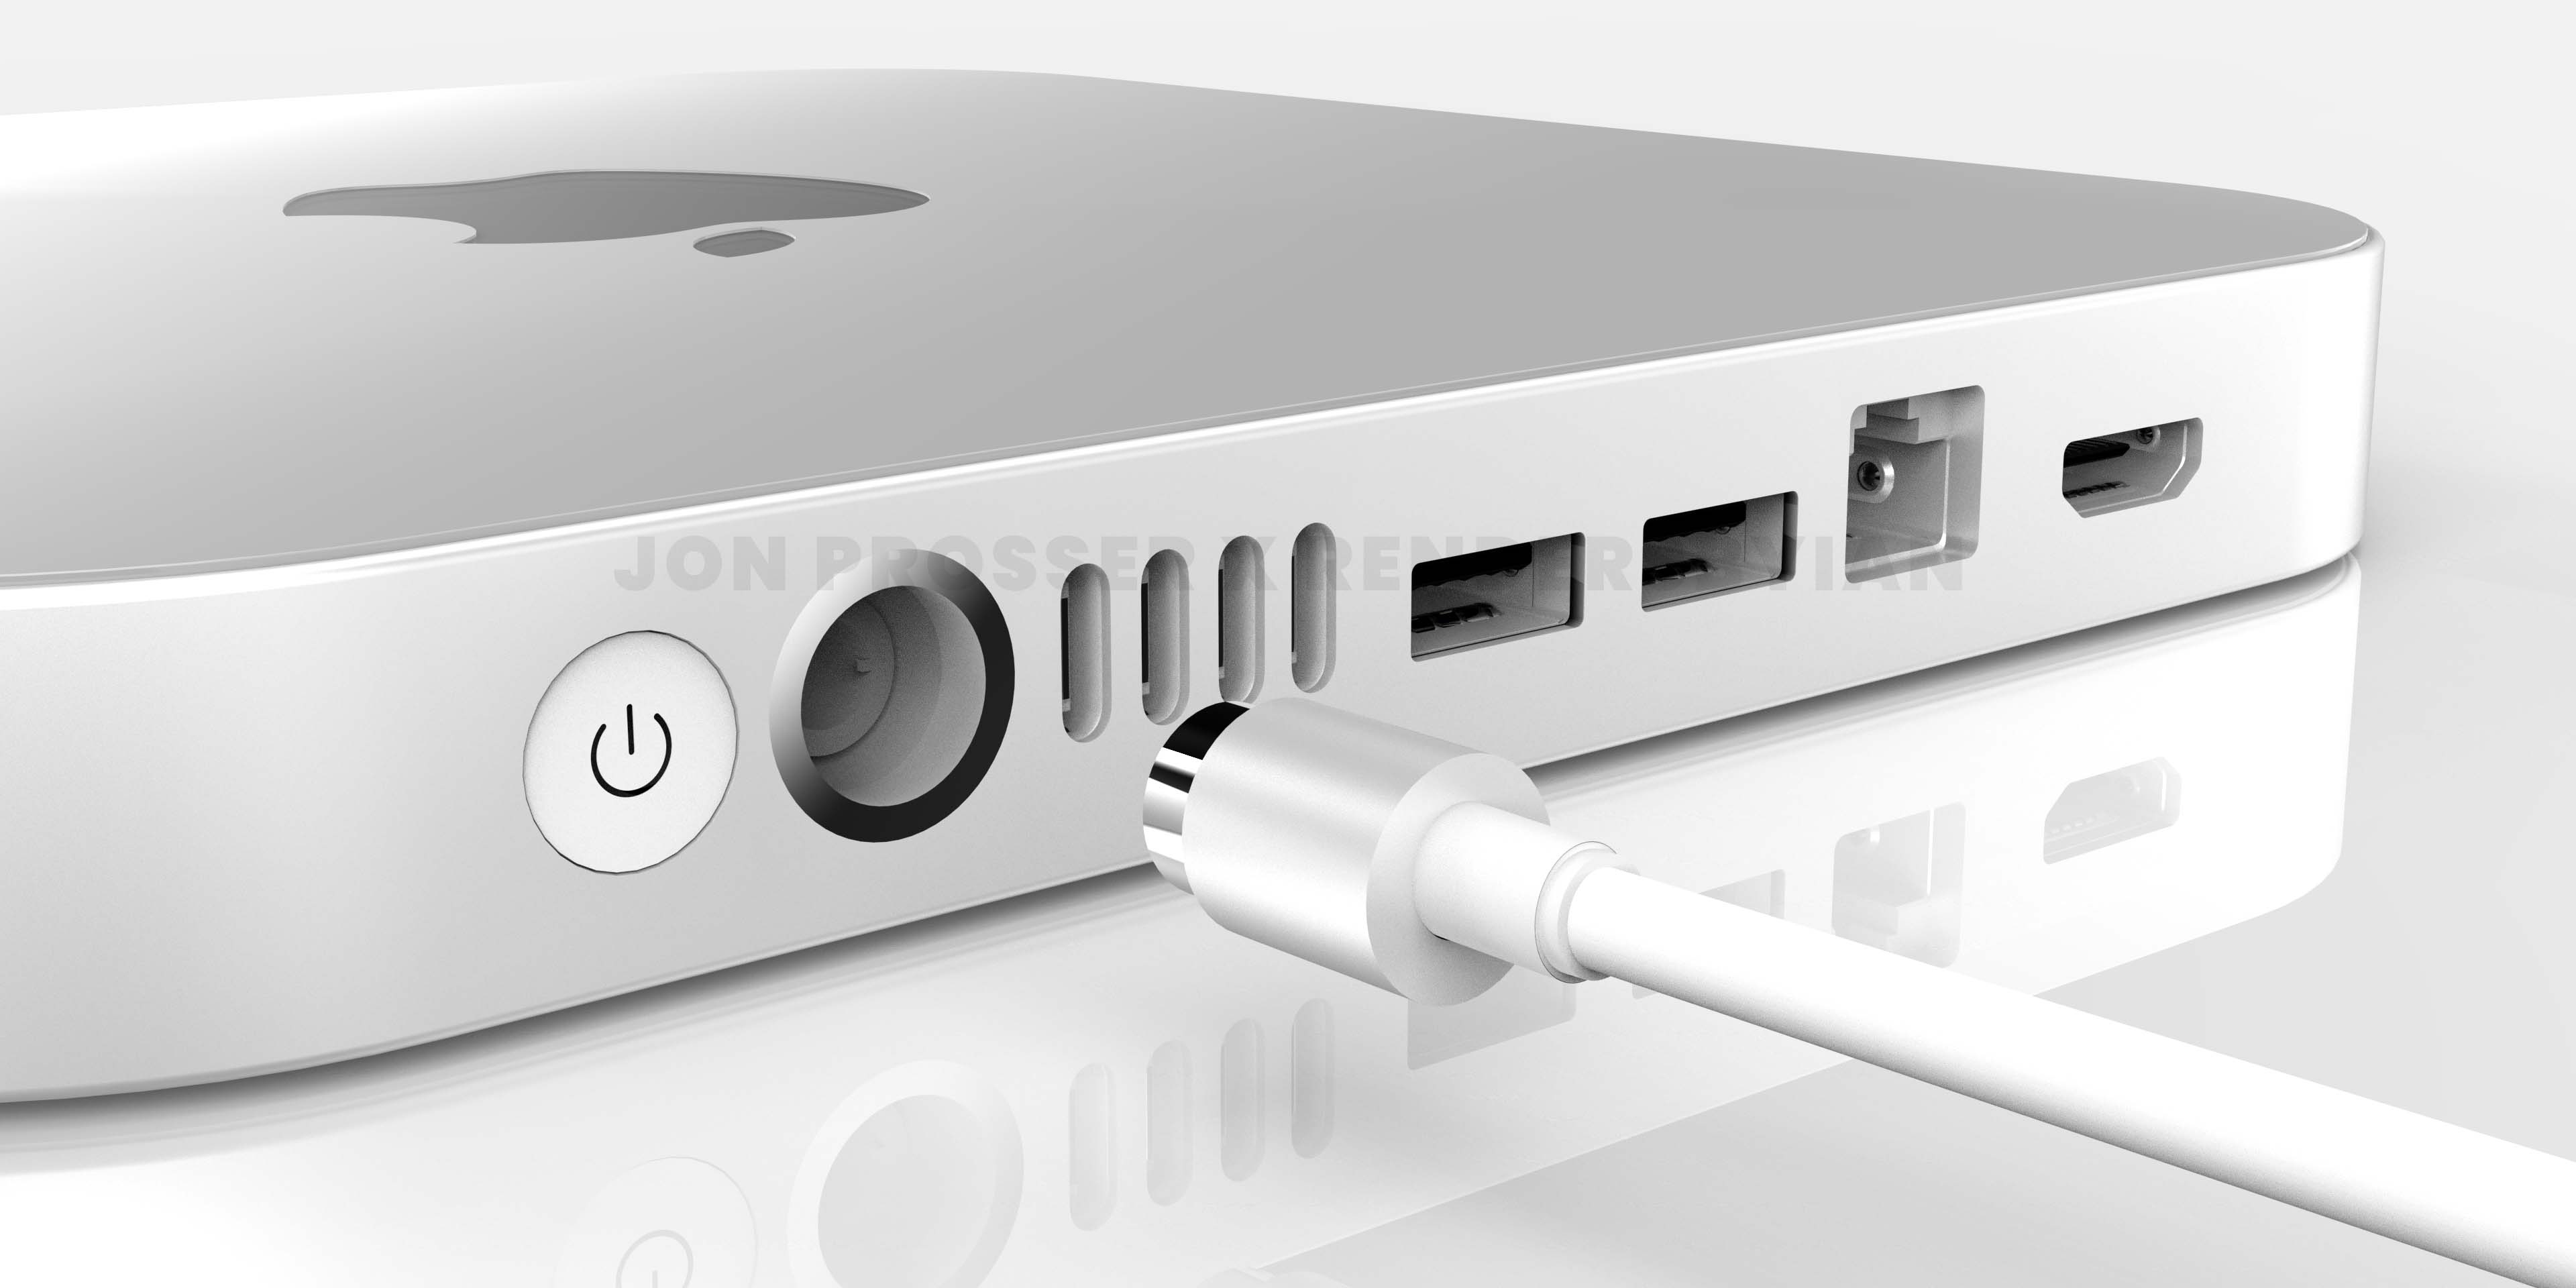 A rendering based on rumors showing the back of the upcoming M1X Mac mini featuring more ports and a magnetic power connection